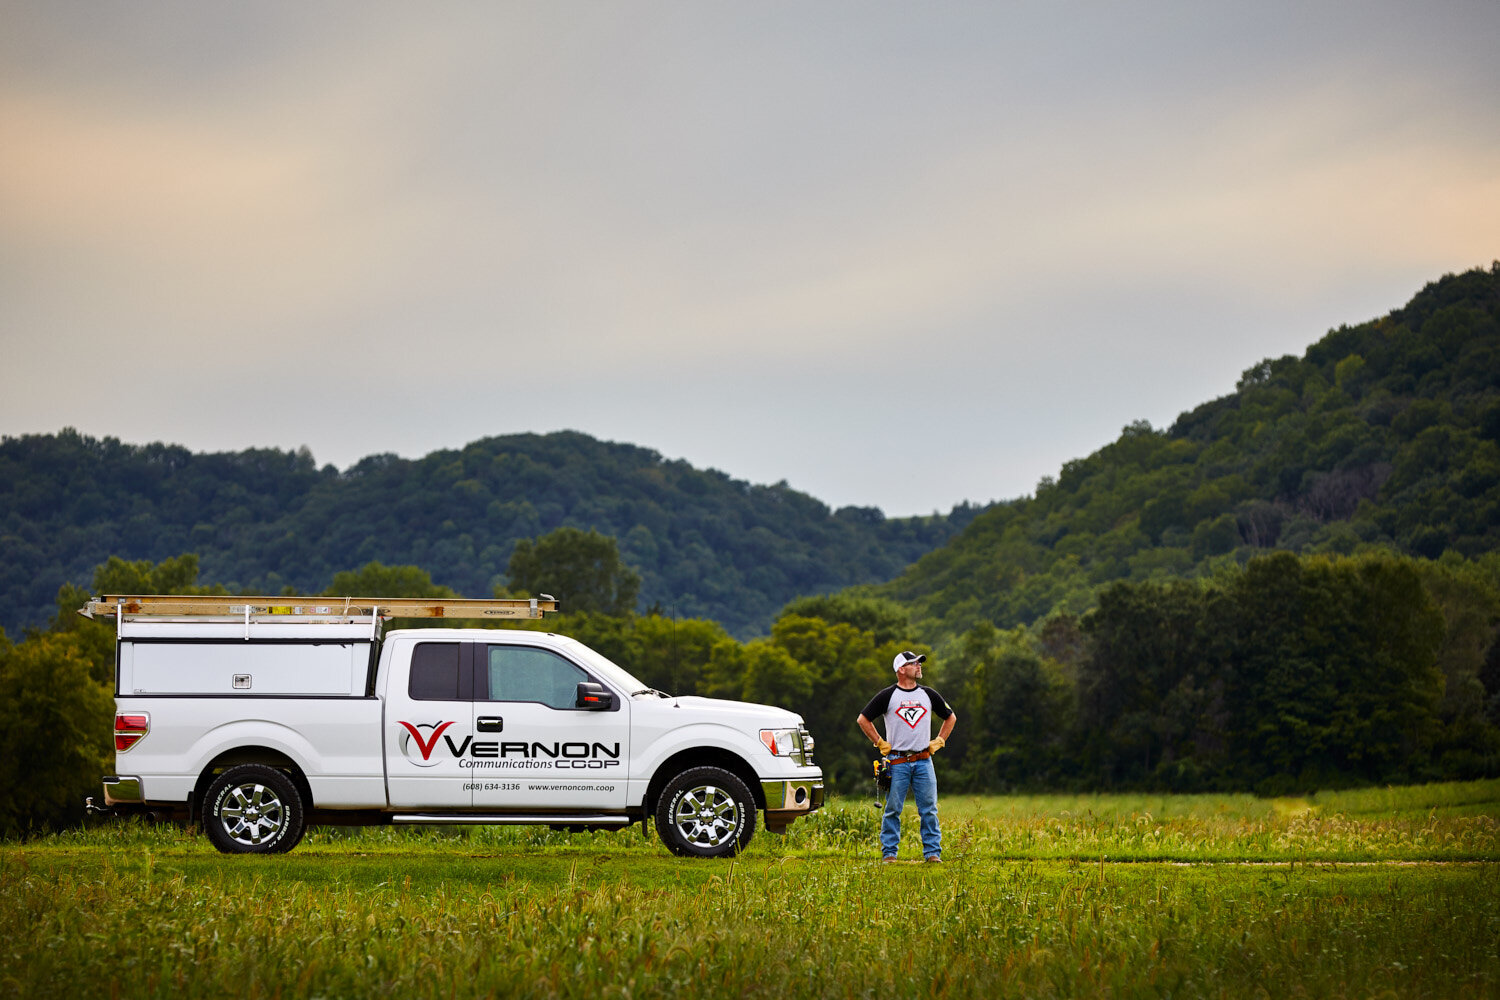 advertising image for communications company: technician posed heroically with truck in the rolling hills of Wisconsin's Driftless Region